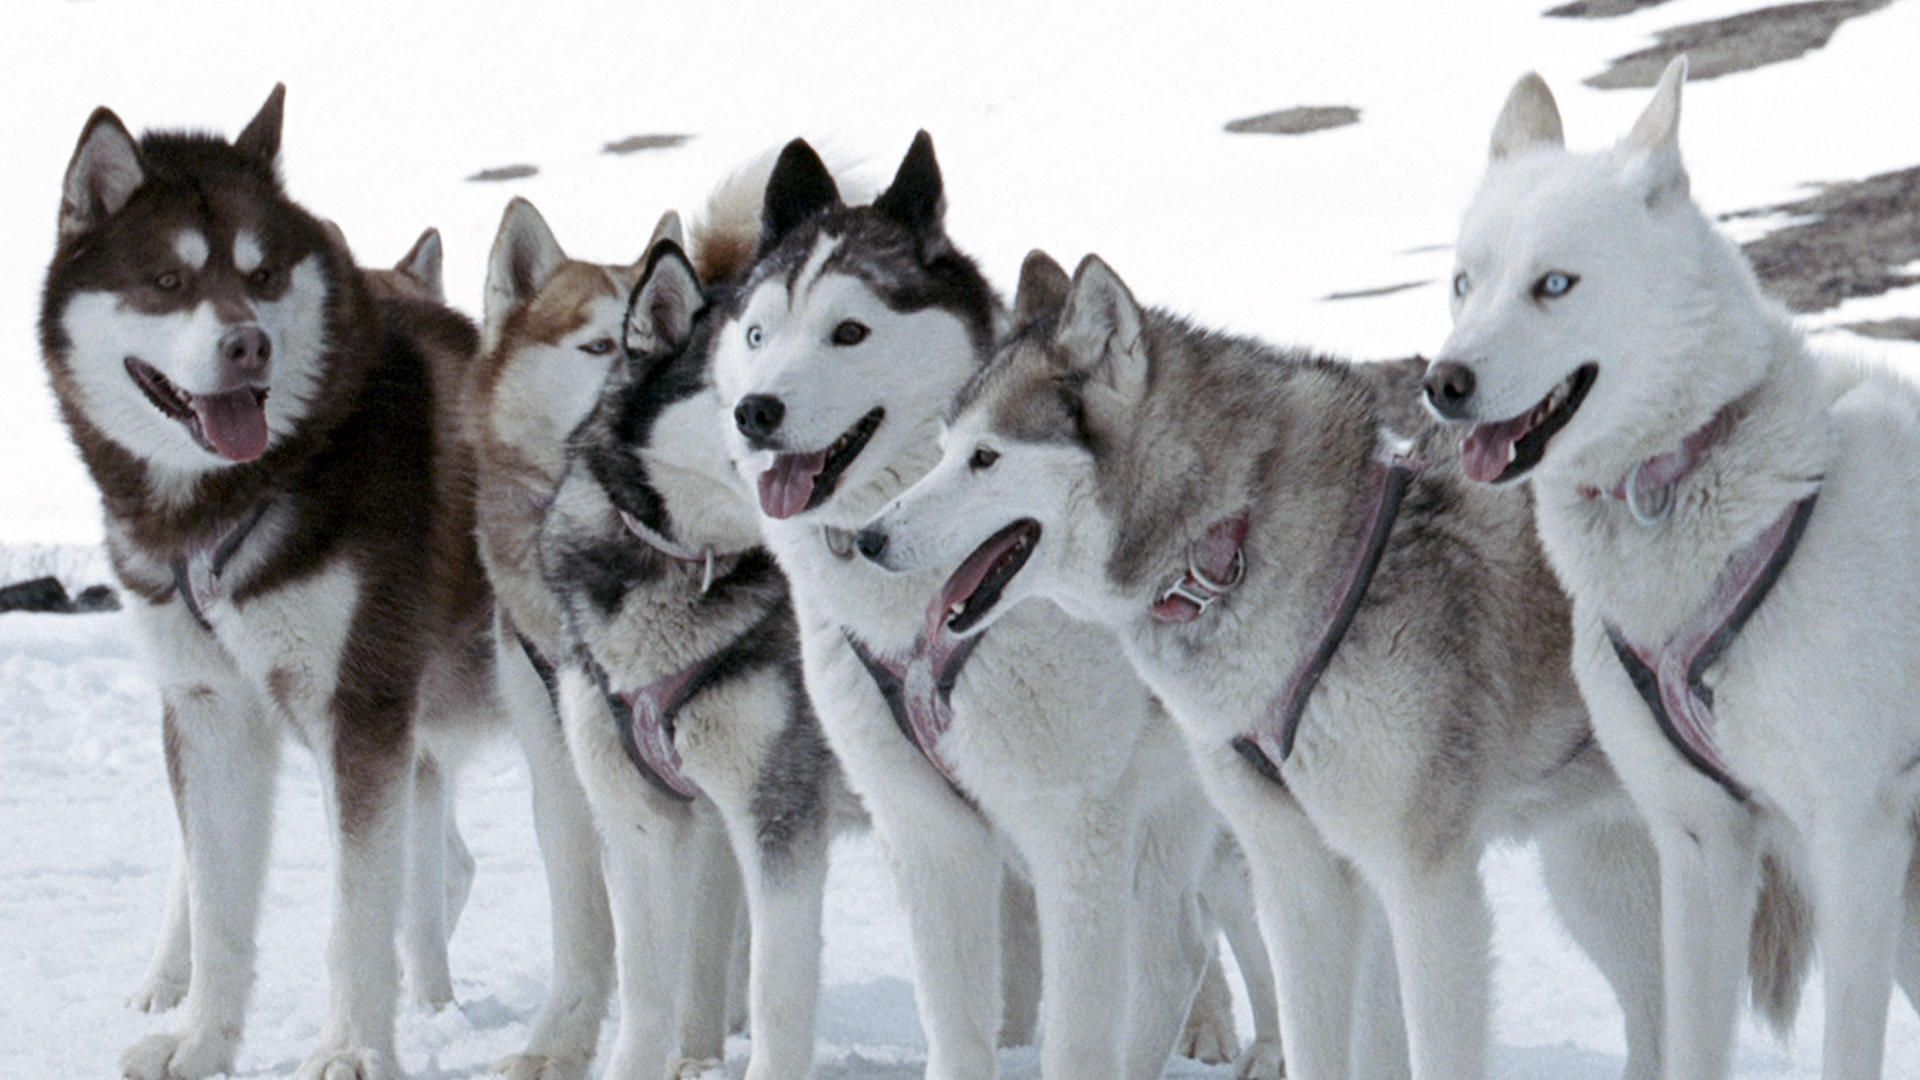 <p>                     Brutal cold forces two Antarctic explorers to leave their team of sled dogs behind as they fend for their survival. He ties his dogs to be rescued, but the mission is called off and the dogs are left alone at their own fortune. For six months, Jerry tries to find a sponsor for a rescue mission while his dogs fight for survival.                    </p>                                      <p>                     Inspired by true events, this is a delightful tale of the courage and spirit of the six Siberian Huskies and two Alaskan Malamutes, it will tug at your heartstrings and entertain you from start to finish with amazingly well-trained canine actors.                   </p>